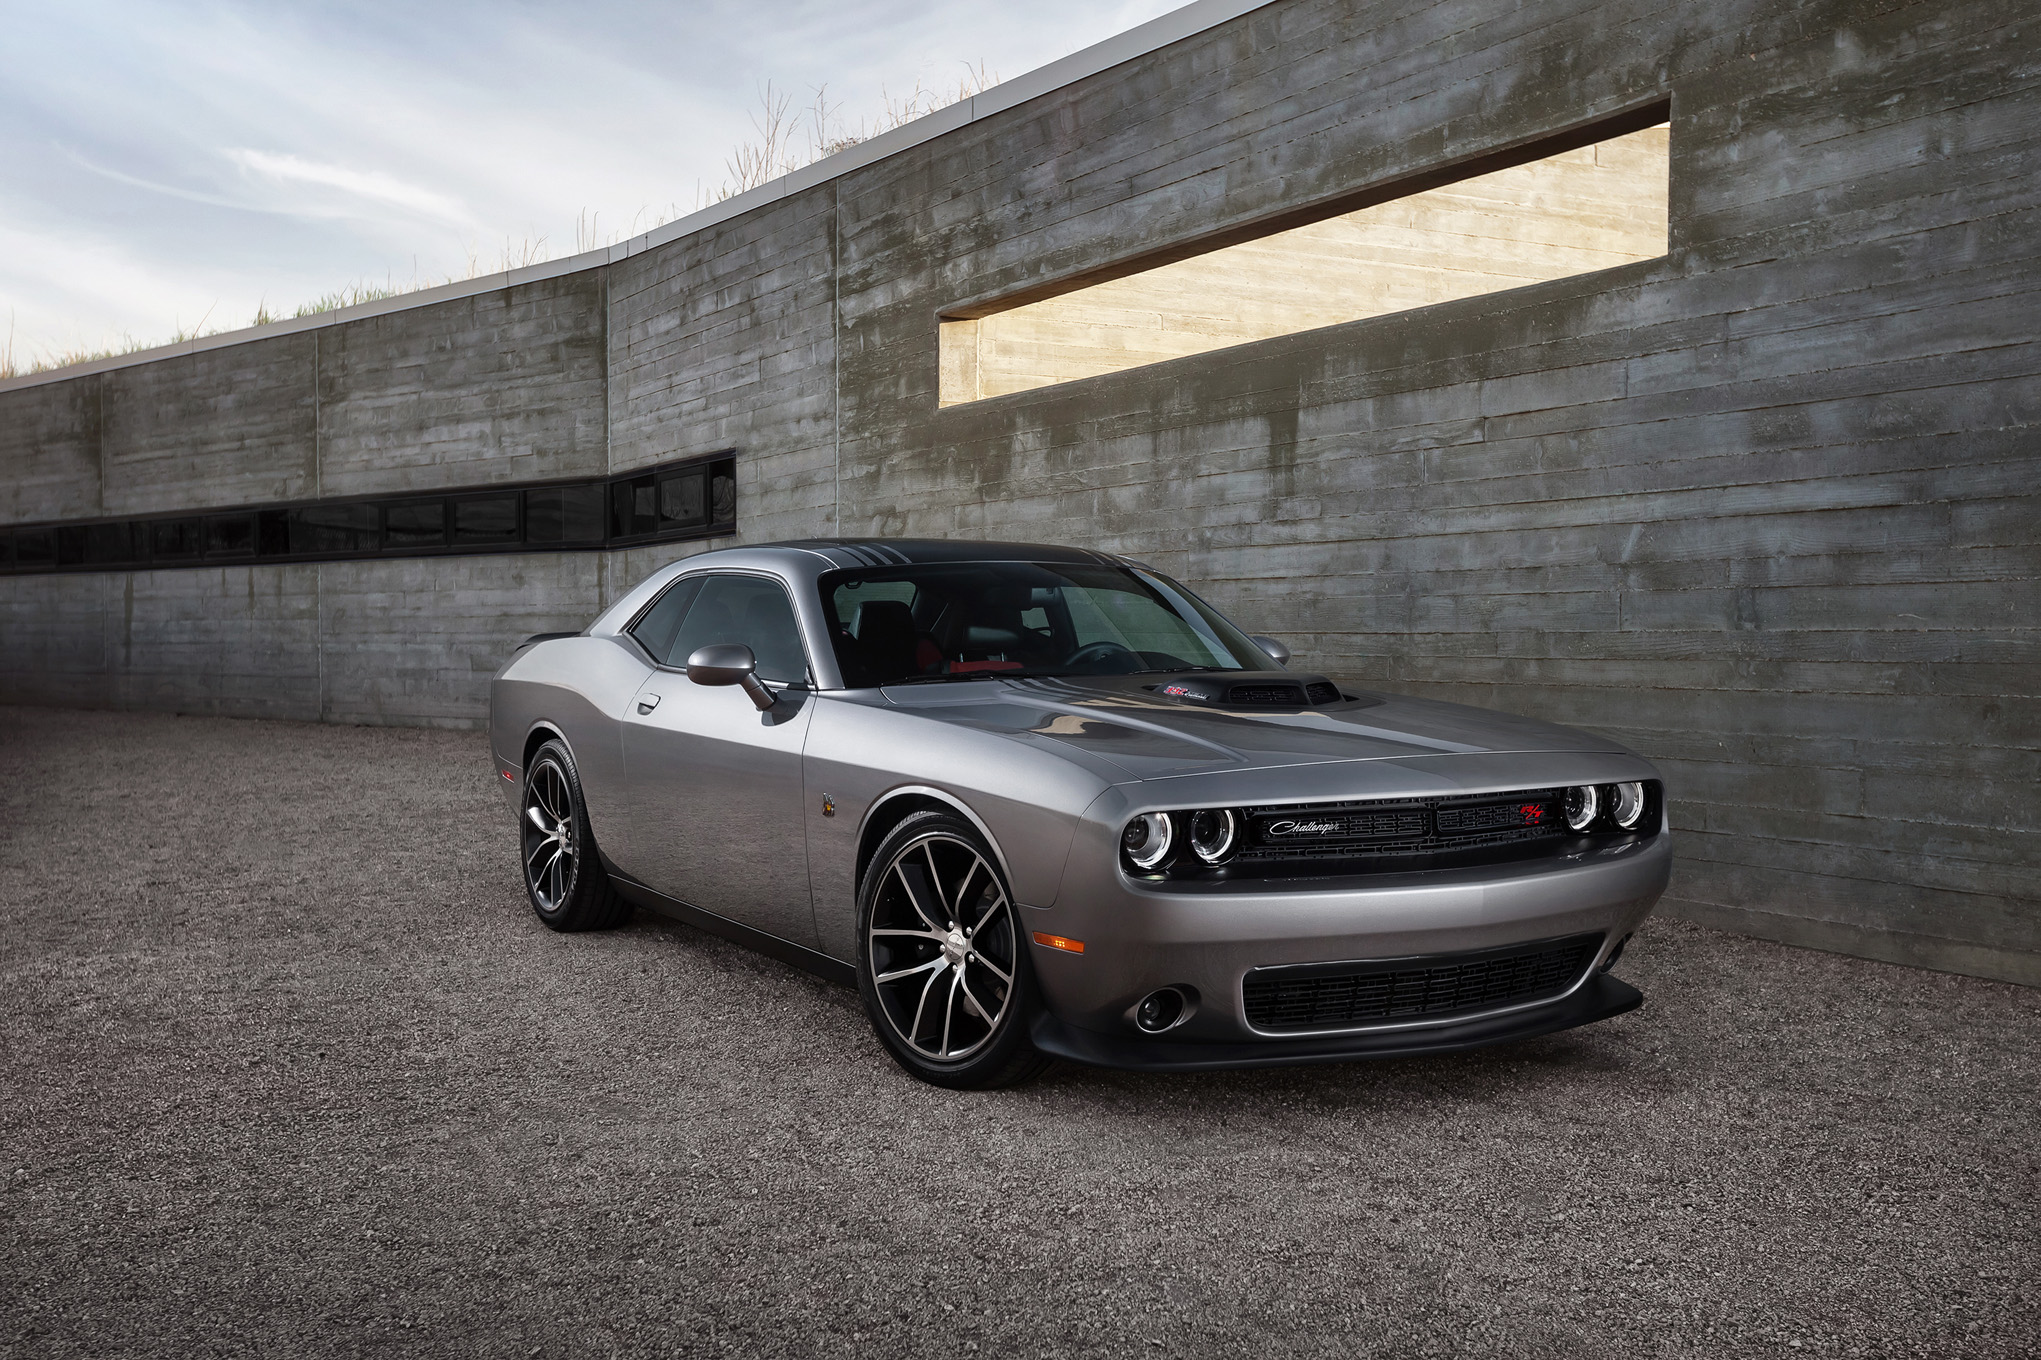 2015 Dodge Challenger Pics, Vehicles Collection